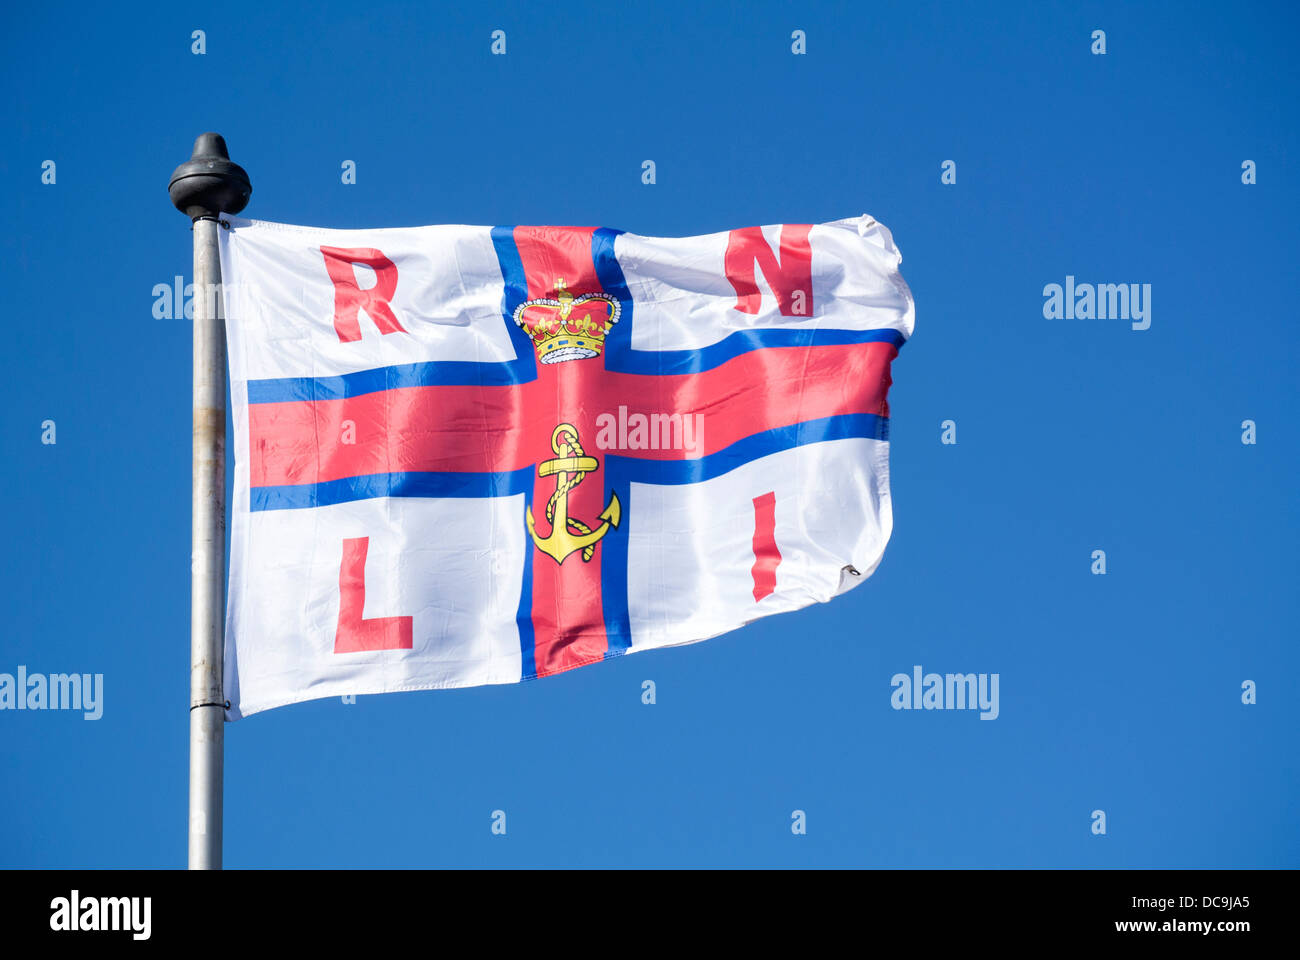 RNLI flag in blue sky blowing in the wind. Stock Photo